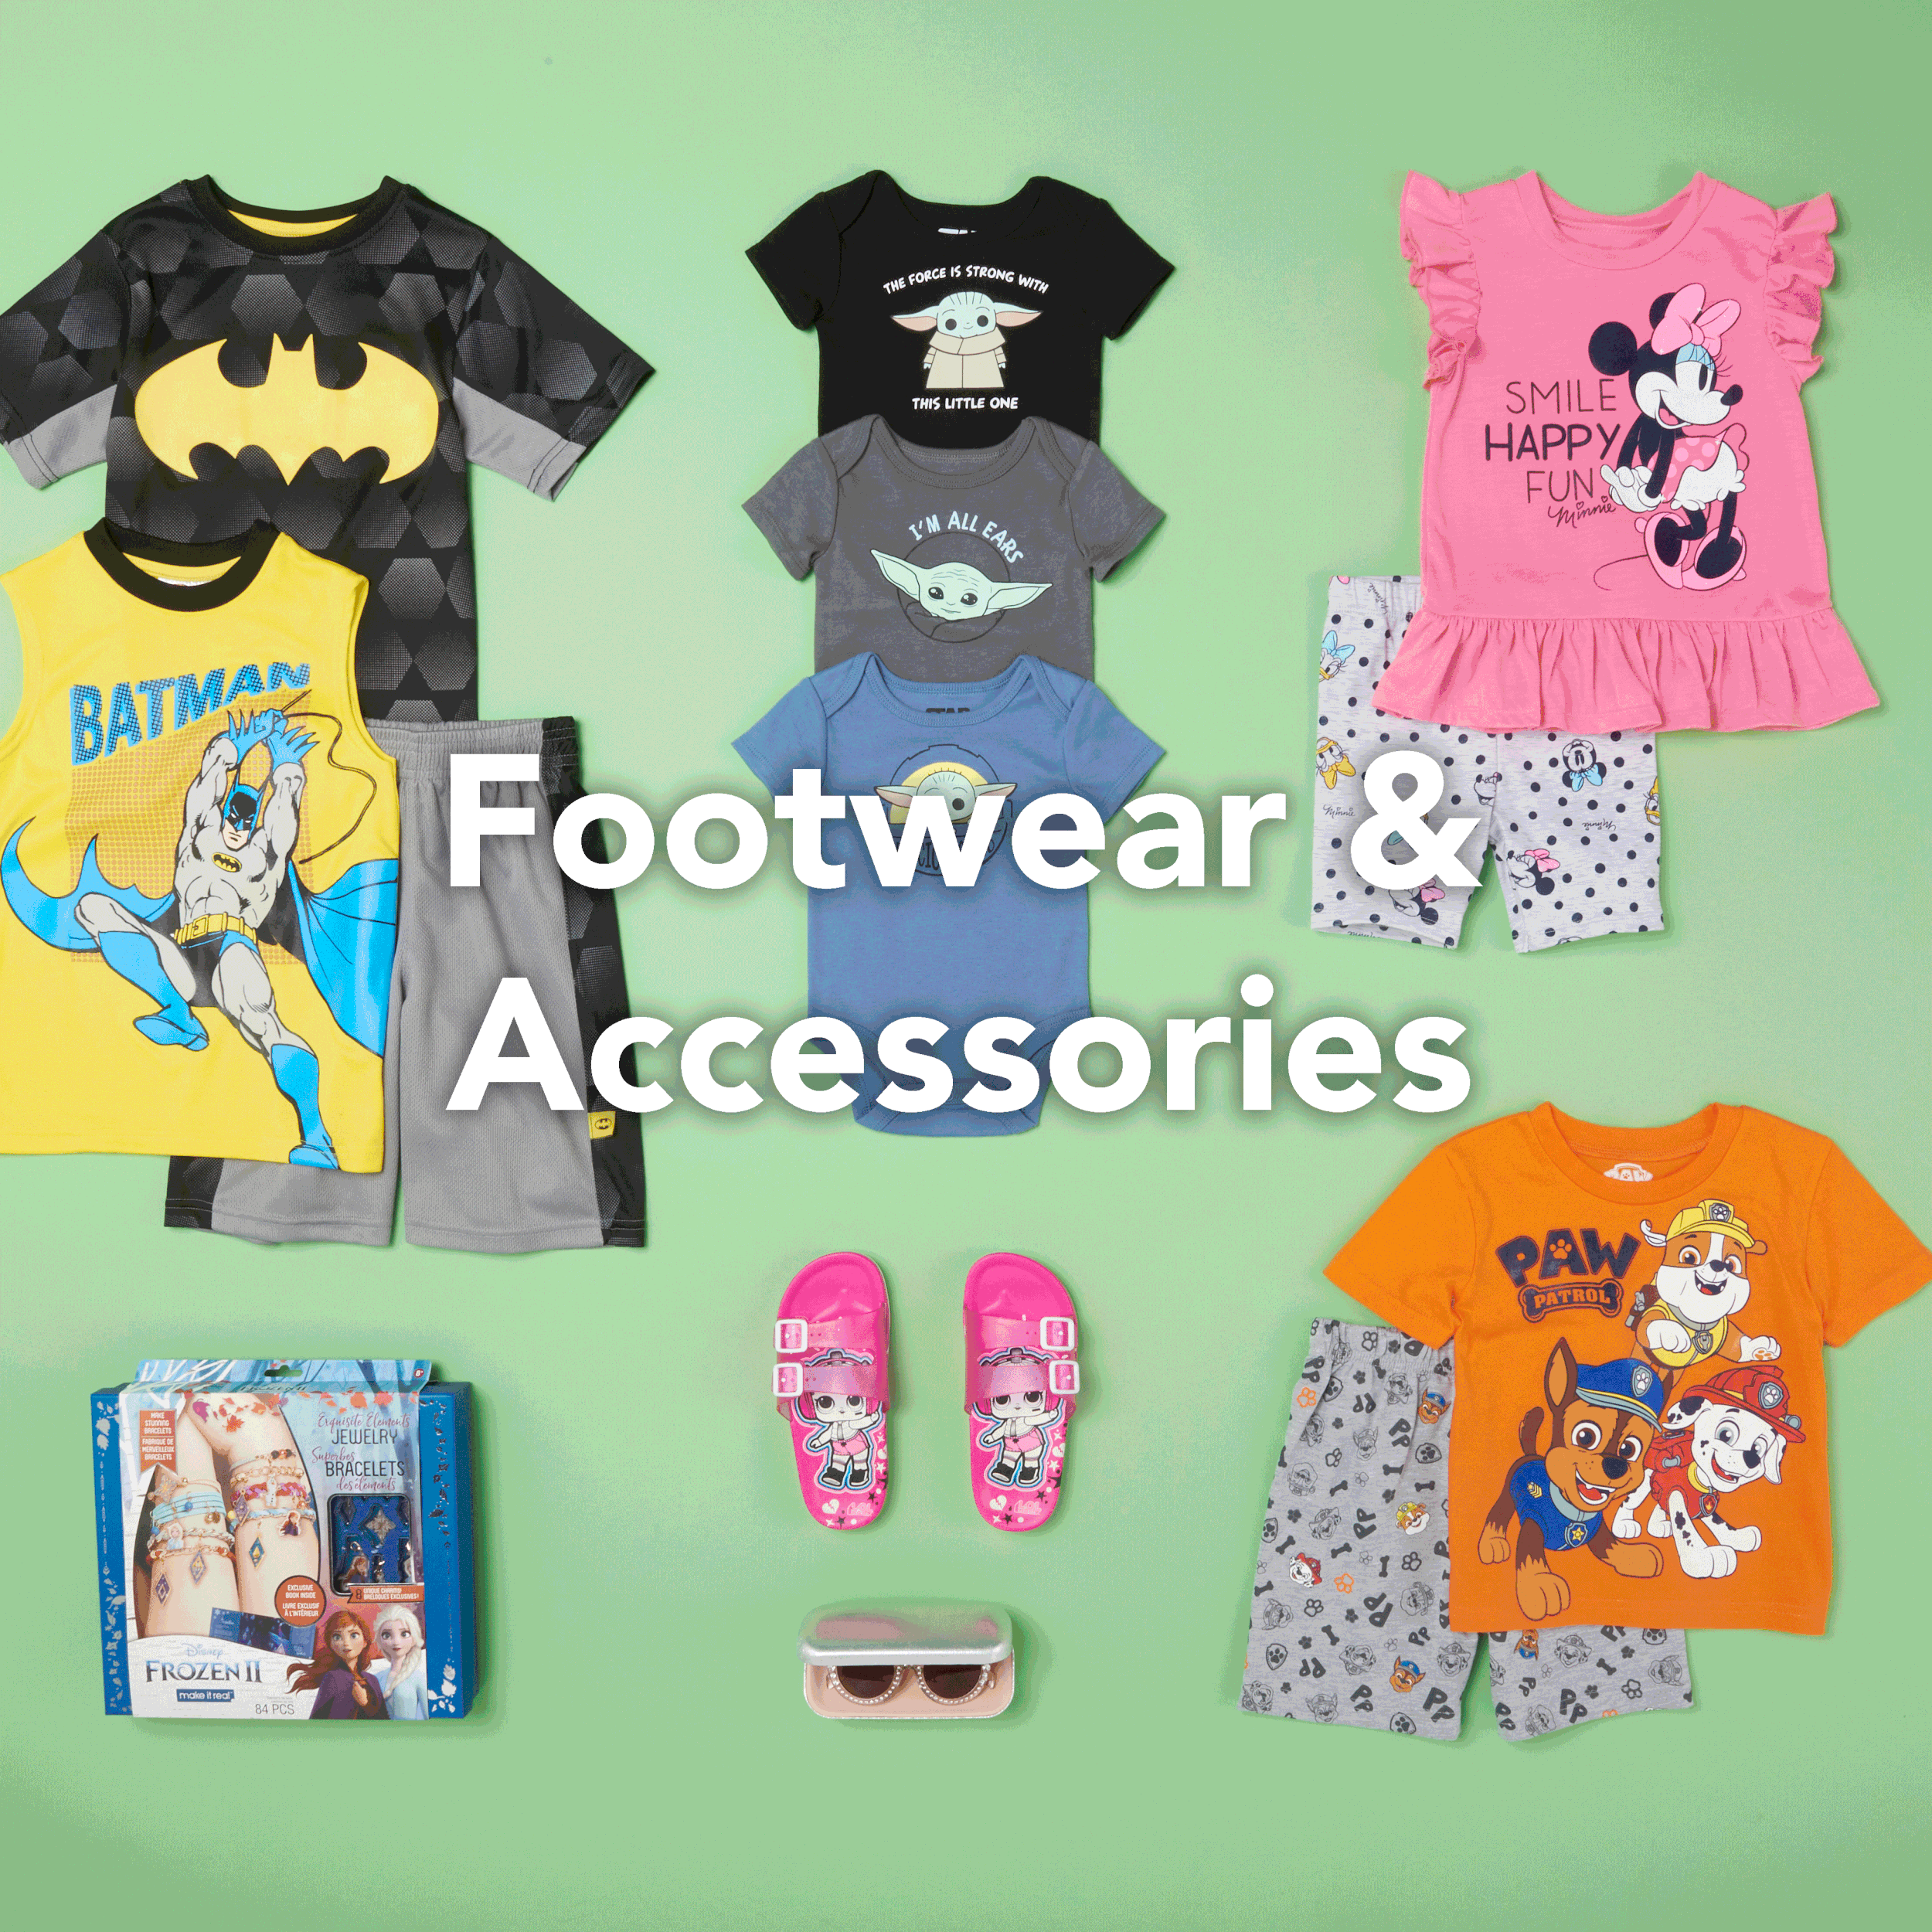 Kid's Clothing & Accessories Near You: Apparel, Outfits, Fashion